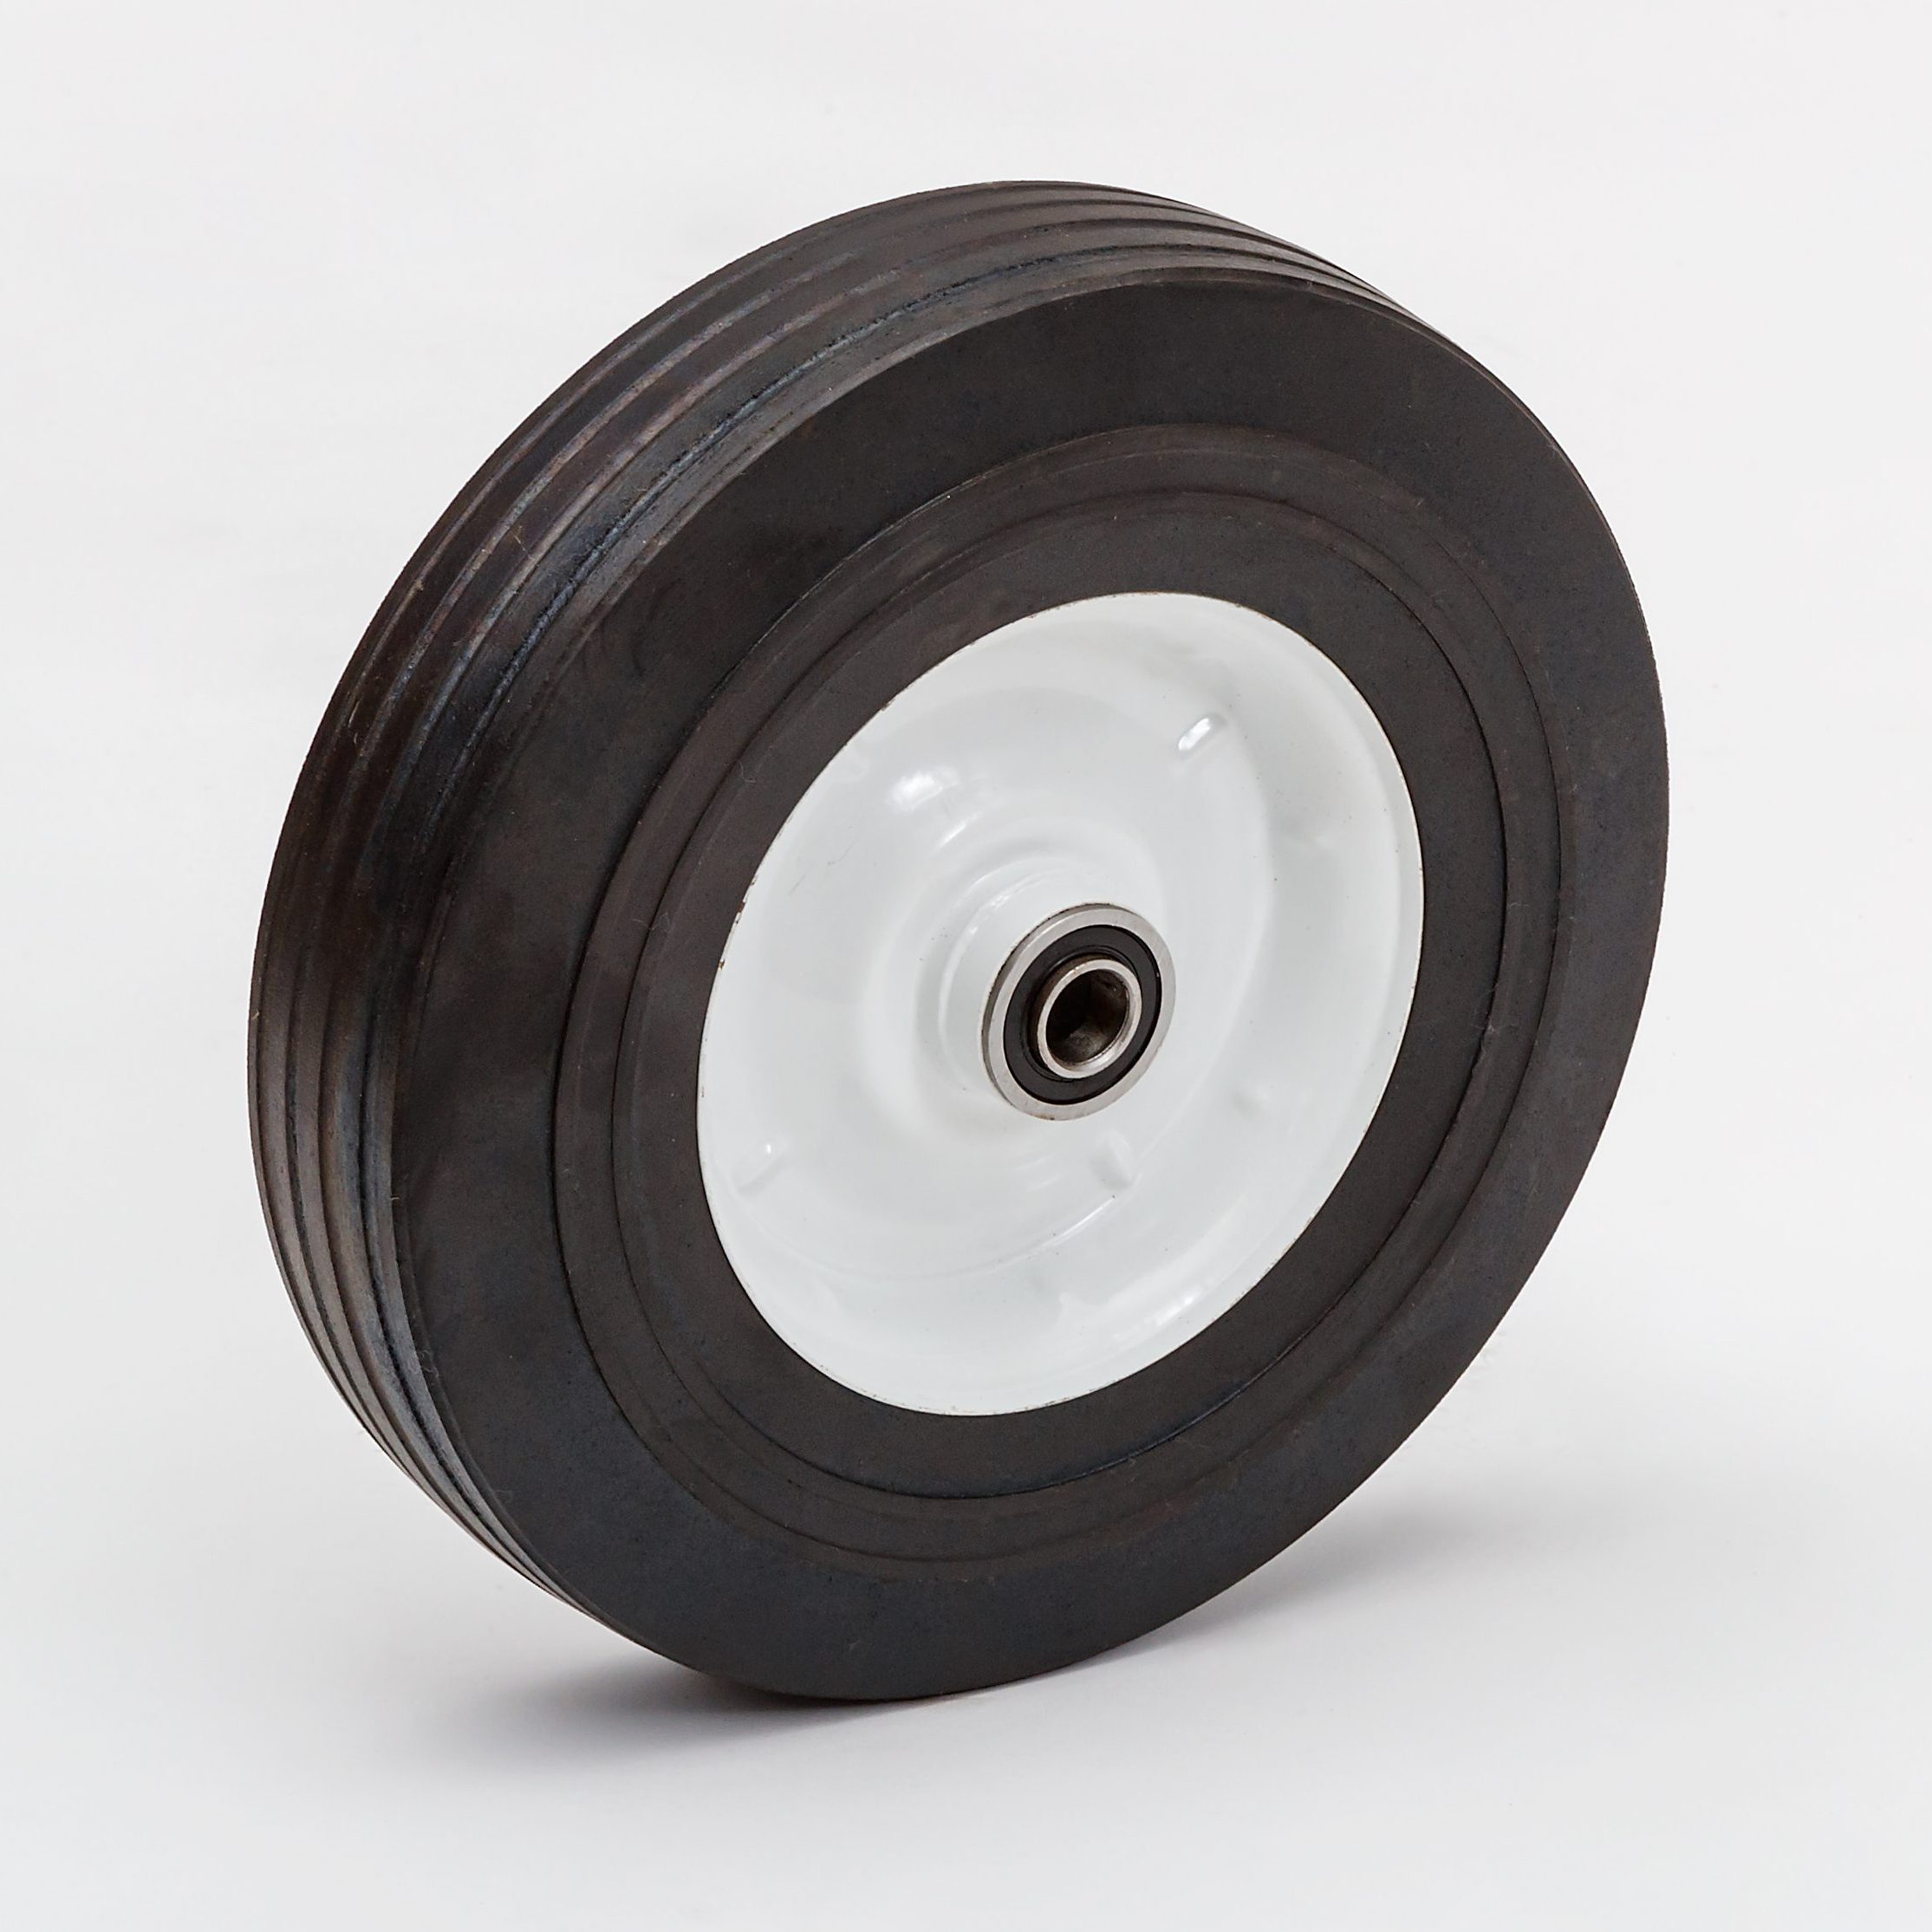 Cart 400 lb Dolly Sawtooth Tread 2 Heavy Duty Replacement Tire / Rim for Hand Truck Rocky Mountain Dolly Wheel 4.10/3.50-4” 2.25” Offset Hub with Pneumatic 5/8” Ball Bearing Gorilla Cart 